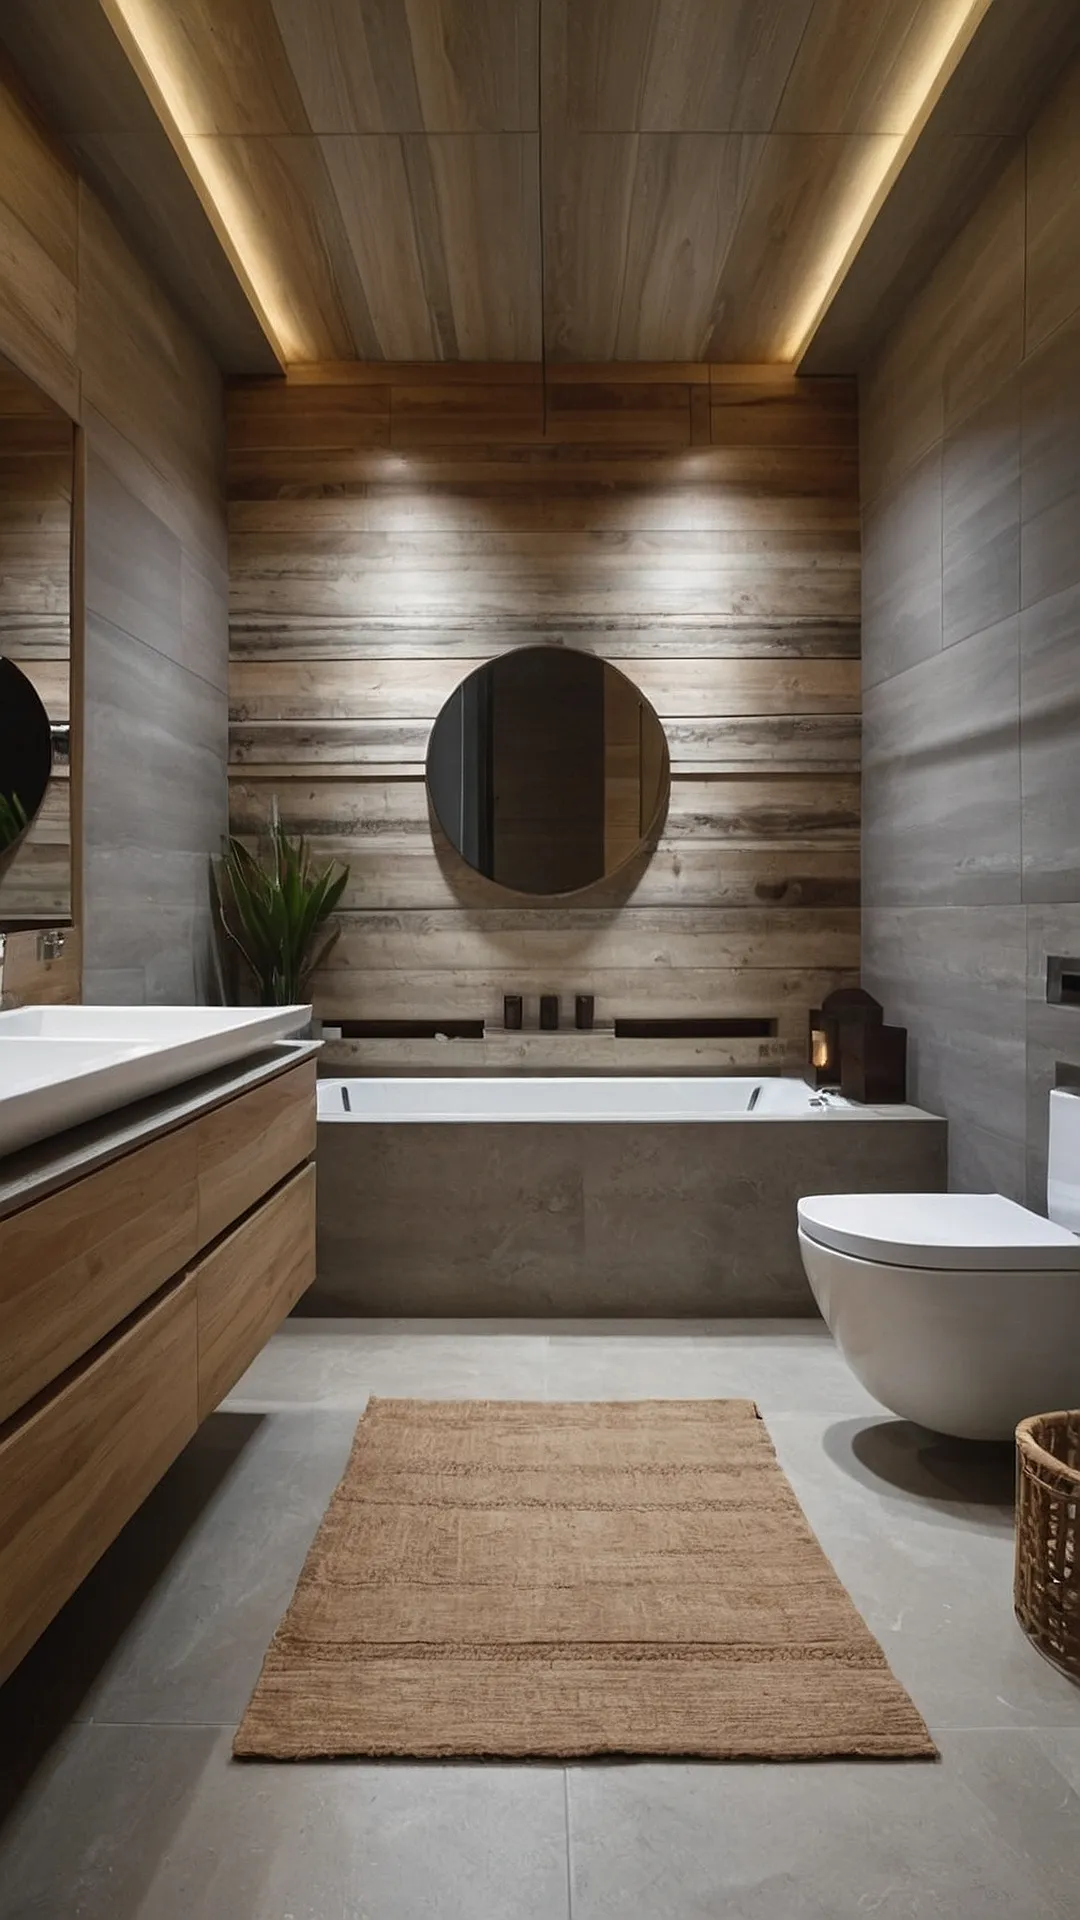 Urban Oasis: Modern Bathrooms to Relax In